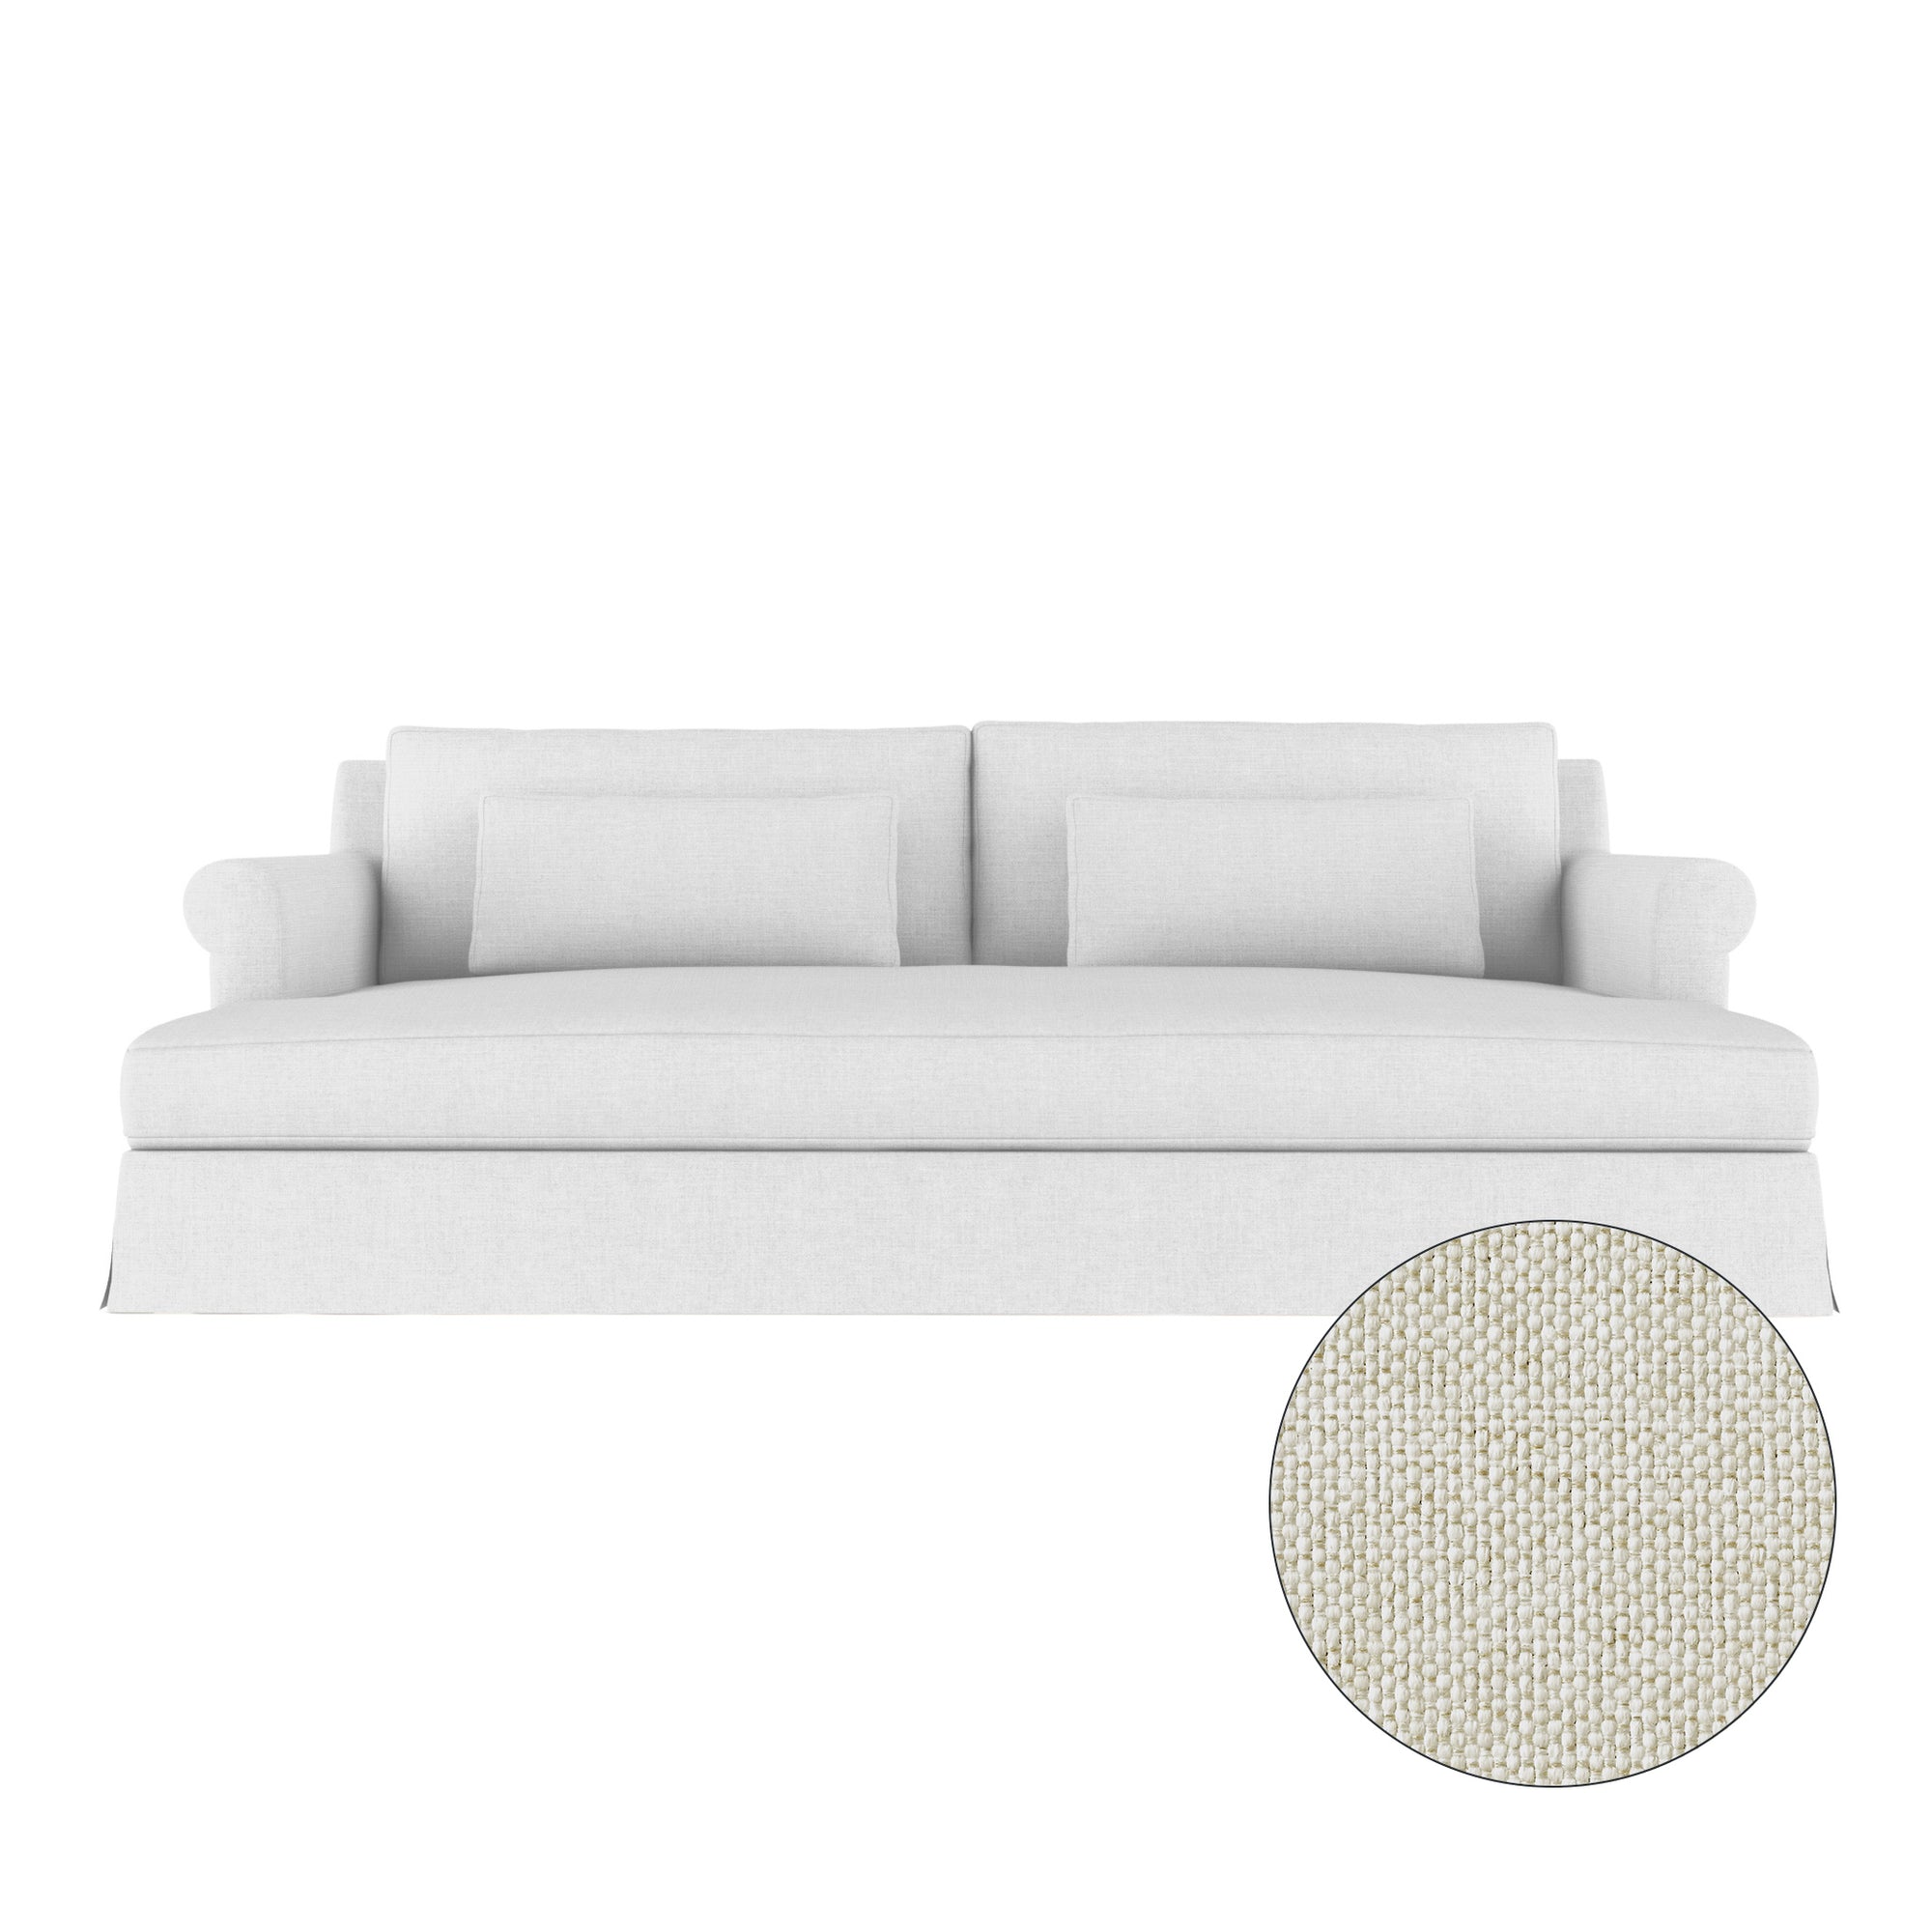 Ludlow Daybed - Alabaster Pebble Weave Linen